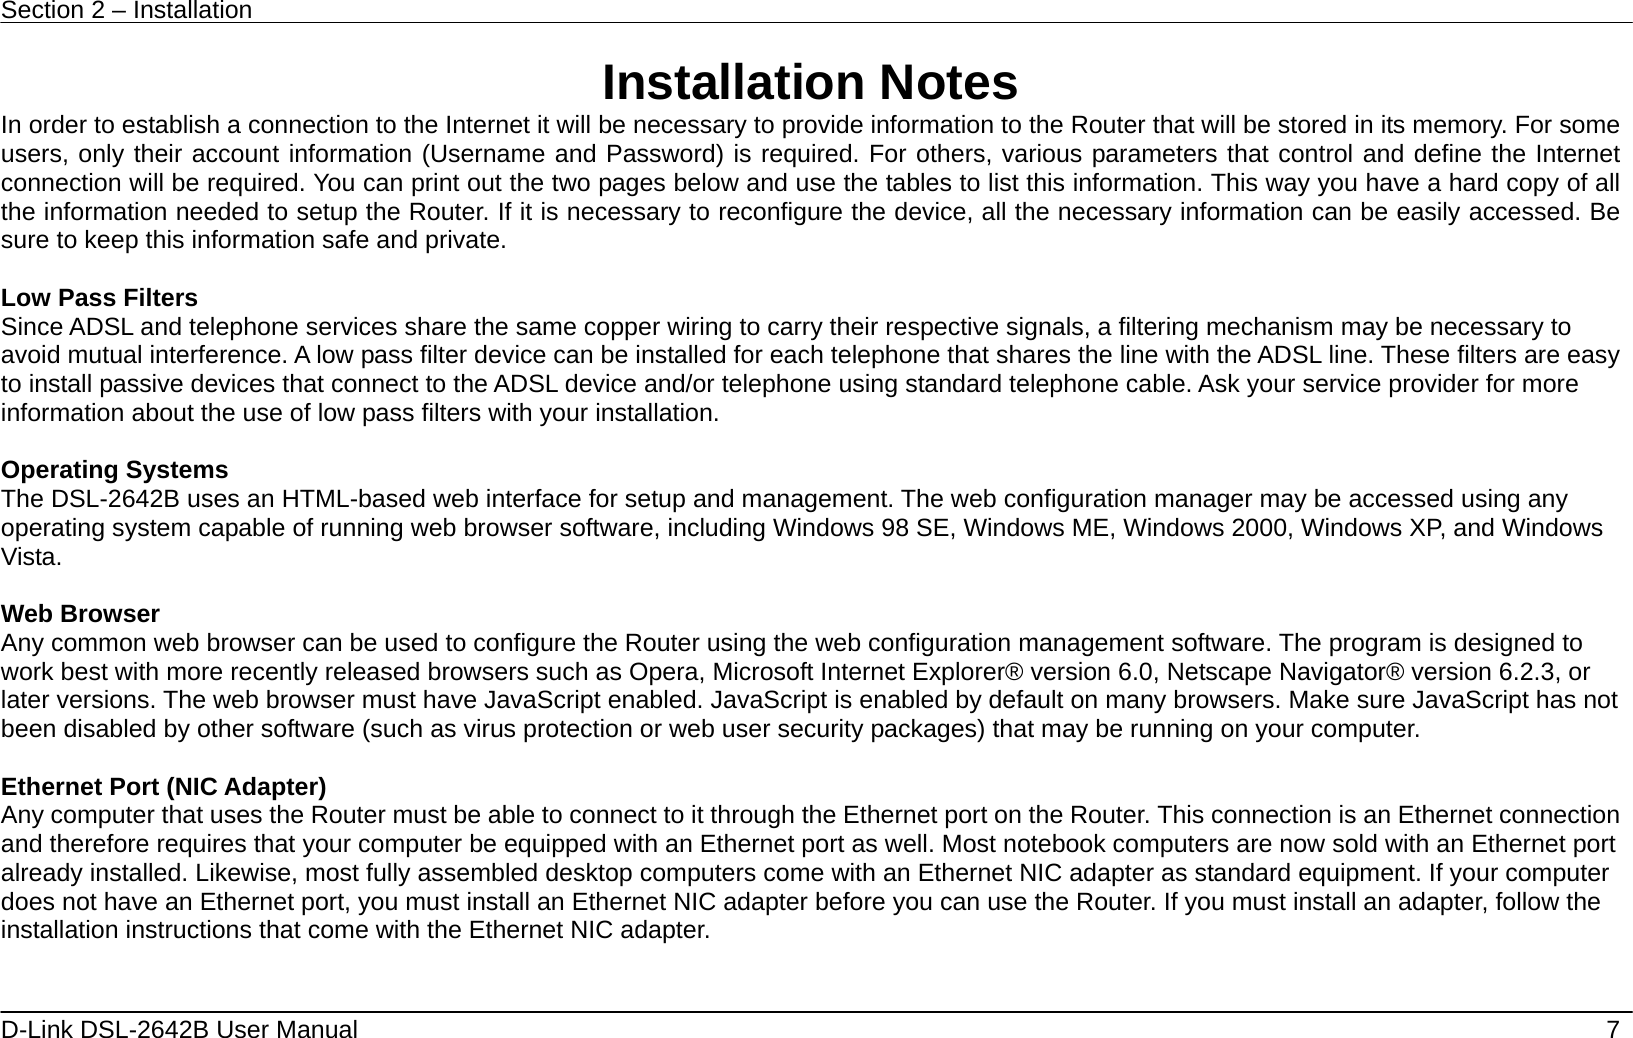 Section 2 – Installation   D-Link DSL-2642B User Manual    7 Installation Notes In order to establish a connection to the Internet it will be necessary to provide information to the Router that will be stored in its memory. For some users, only their account information (Username and Password) is required. For others, various parameters that control and define the Internet connection will be required. You can print out the two pages below and use the tables to list this information. This way you have a hard copy of all the information needed to setup the Router. If it is necessary to reconfigure the device, all the necessary information can be easily accessed. Be sure to keep this information safe and private.  Low Pass Filters Since ADSL and telephone services share the same copper wiring to carry their respective signals, a filtering mechanism may be necessary to avoid mutual interference. A low pass filter device can be installed for each telephone that shares the line with the ADSL line. These filters are easy to install passive devices that connect to the ADSL device and/or telephone using standard telephone cable. Ask your service provider for more information about the use of low pass filters with your installation.    Operating Systems The DSL-2642B uses an HTML-based web interface for setup and management. The web configuration manager may be accessed using any operating system capable of running web browser software, including Windows 98 SE, Windows ME, Windows 2000, Windows XP, and Windows Vista.   Web Browser Any common web browser can be used to configure the Router using the web configuration management software. The program is designed to work best with more recently released browsers such as Opera, Microsoft Internet Explorer® version 6.0, Netscape Navigator® version 6.2.3, or later versions. The web browser must have JavaScript enabled. JavaScript is enabled by default on many browsers. Make sure JavaScript has not been disabled by other software (such as virus protection or web user security packages) that may be running on your computer.  Ethernet Port (NIC Adapter) Any computer that uses the Router must be able to connect to it through the Ethernet port on the Router. This connection is an Ethernet connection and therefore requires that your computer be equipped with an Ethernet port as well. Most notebook computers are now sold with an Ethernet port already installed. Likewise, most fully assembled desktop computers come with an Ethernet NIC adapter as standard equipment. If your computer does not have an Ethernet port, you must install an Ethernet NIC adapter before you can use the Router. If you must install an adapter, follow the installation instructions that come with the Ethernet NIC adapter.     